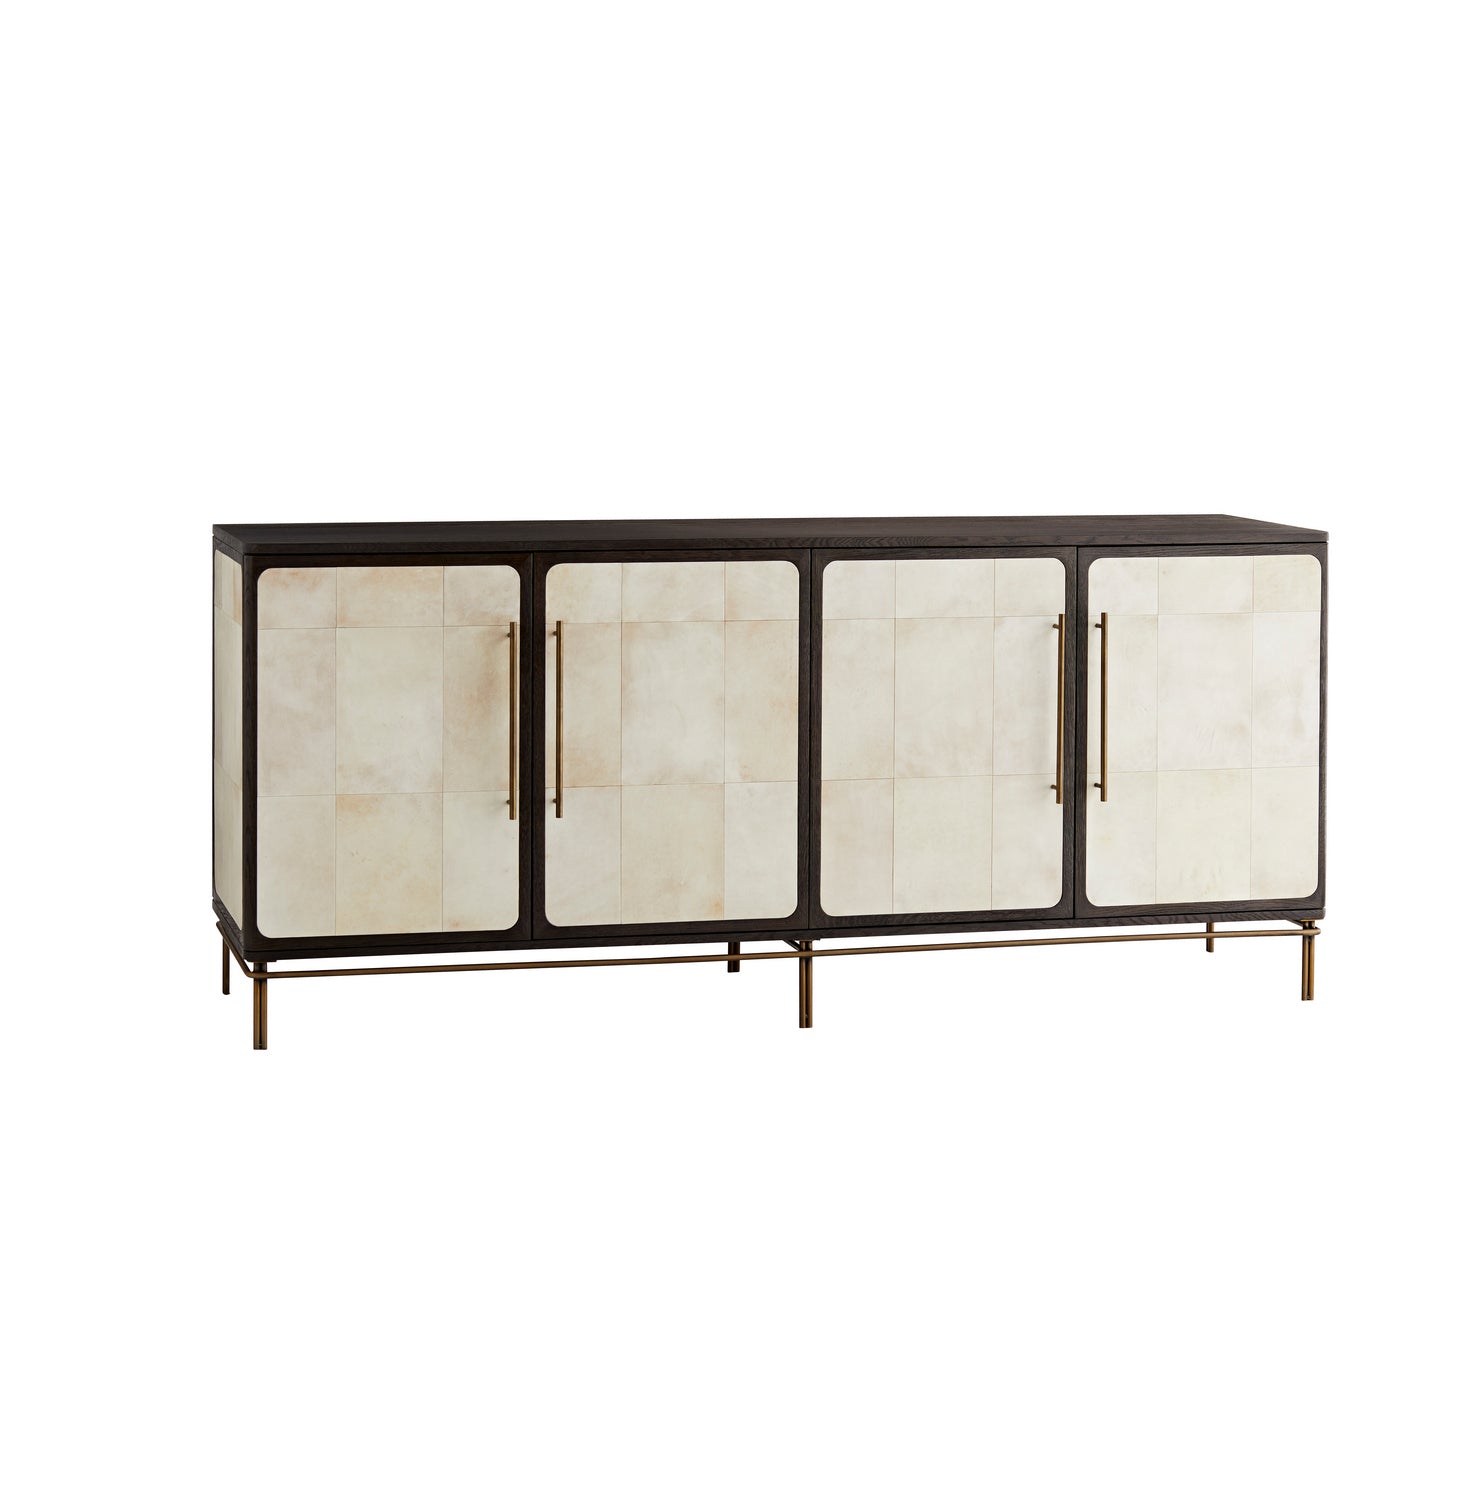 Credenza from the Edison collection in Ivory finish